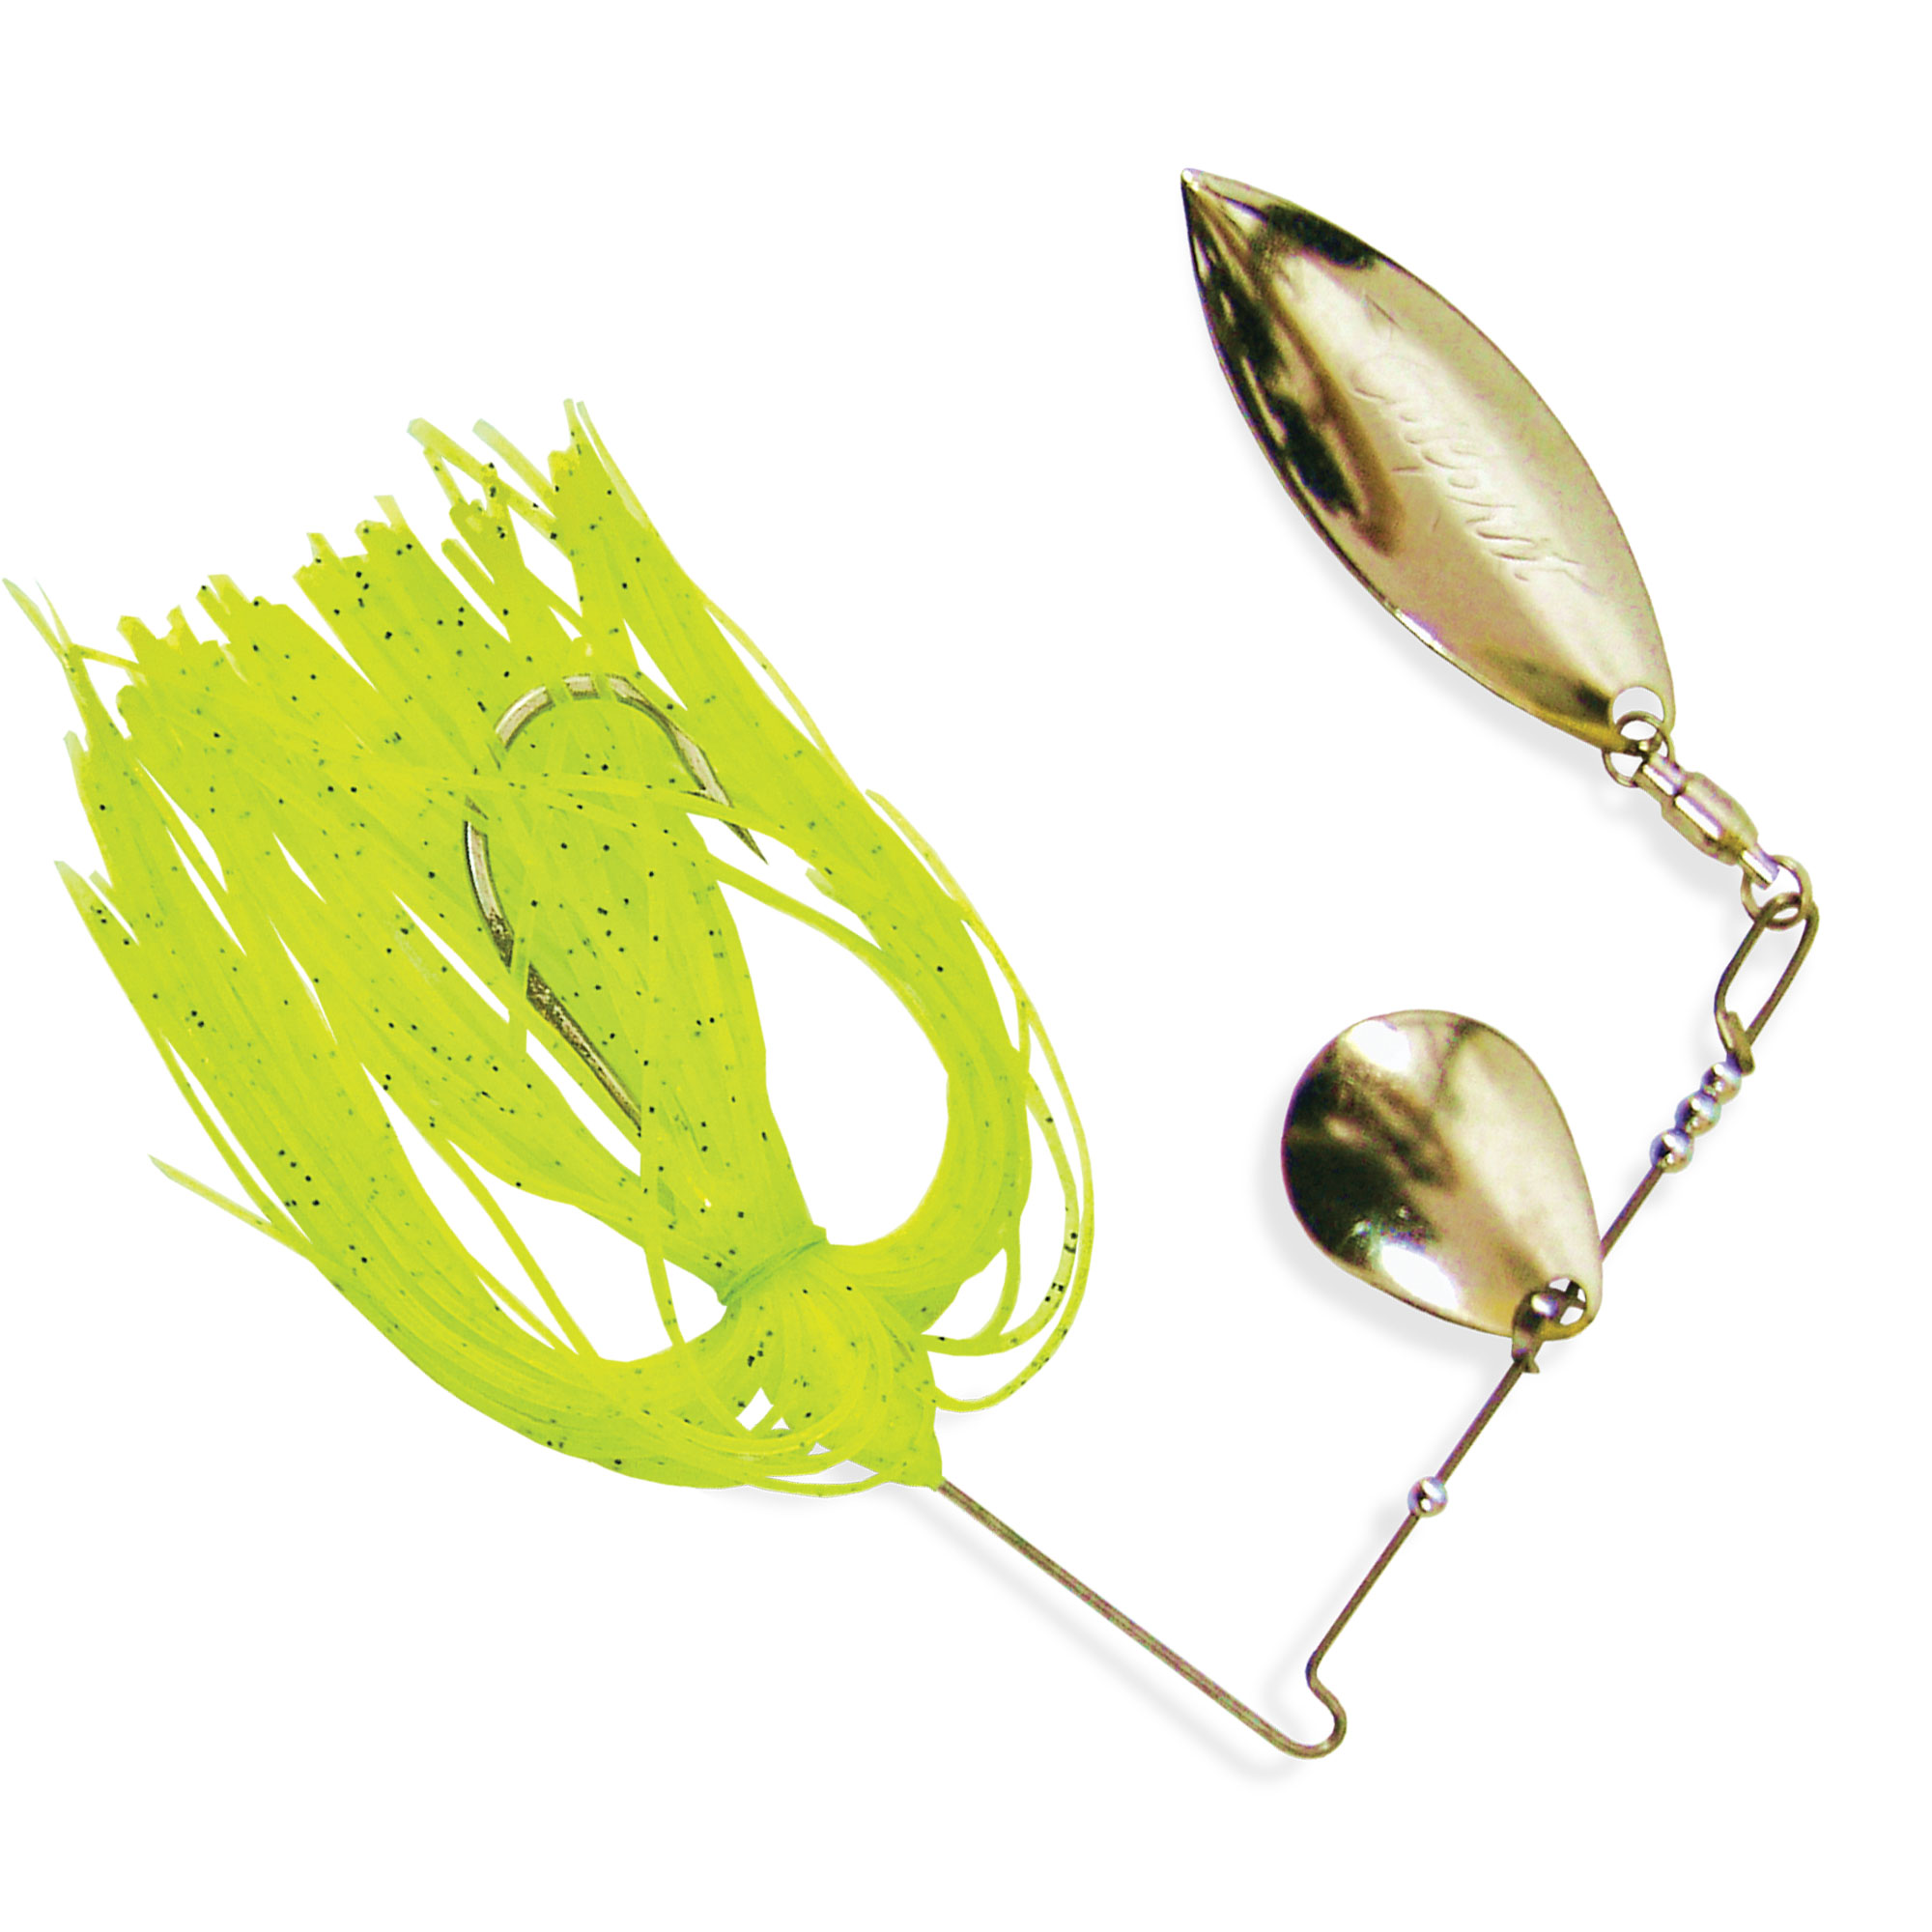 Spinnerbait, CLEARANCE, LIMITED STOCK